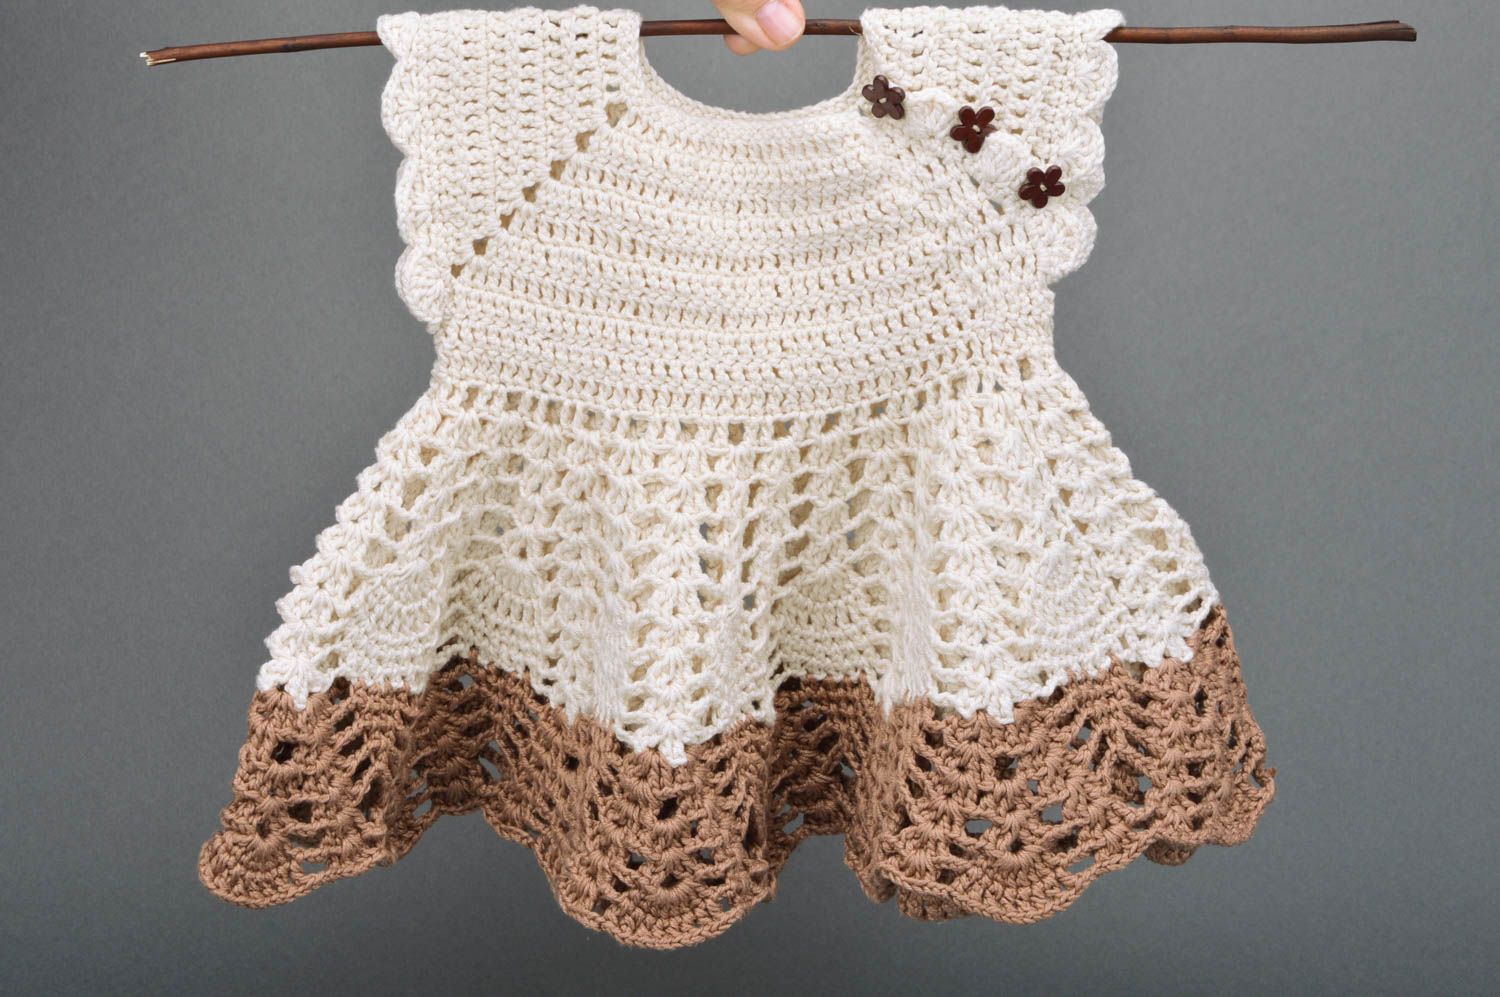 Handmade baby girl lace dress crocheted of acrylic threads beige and brown photo 4